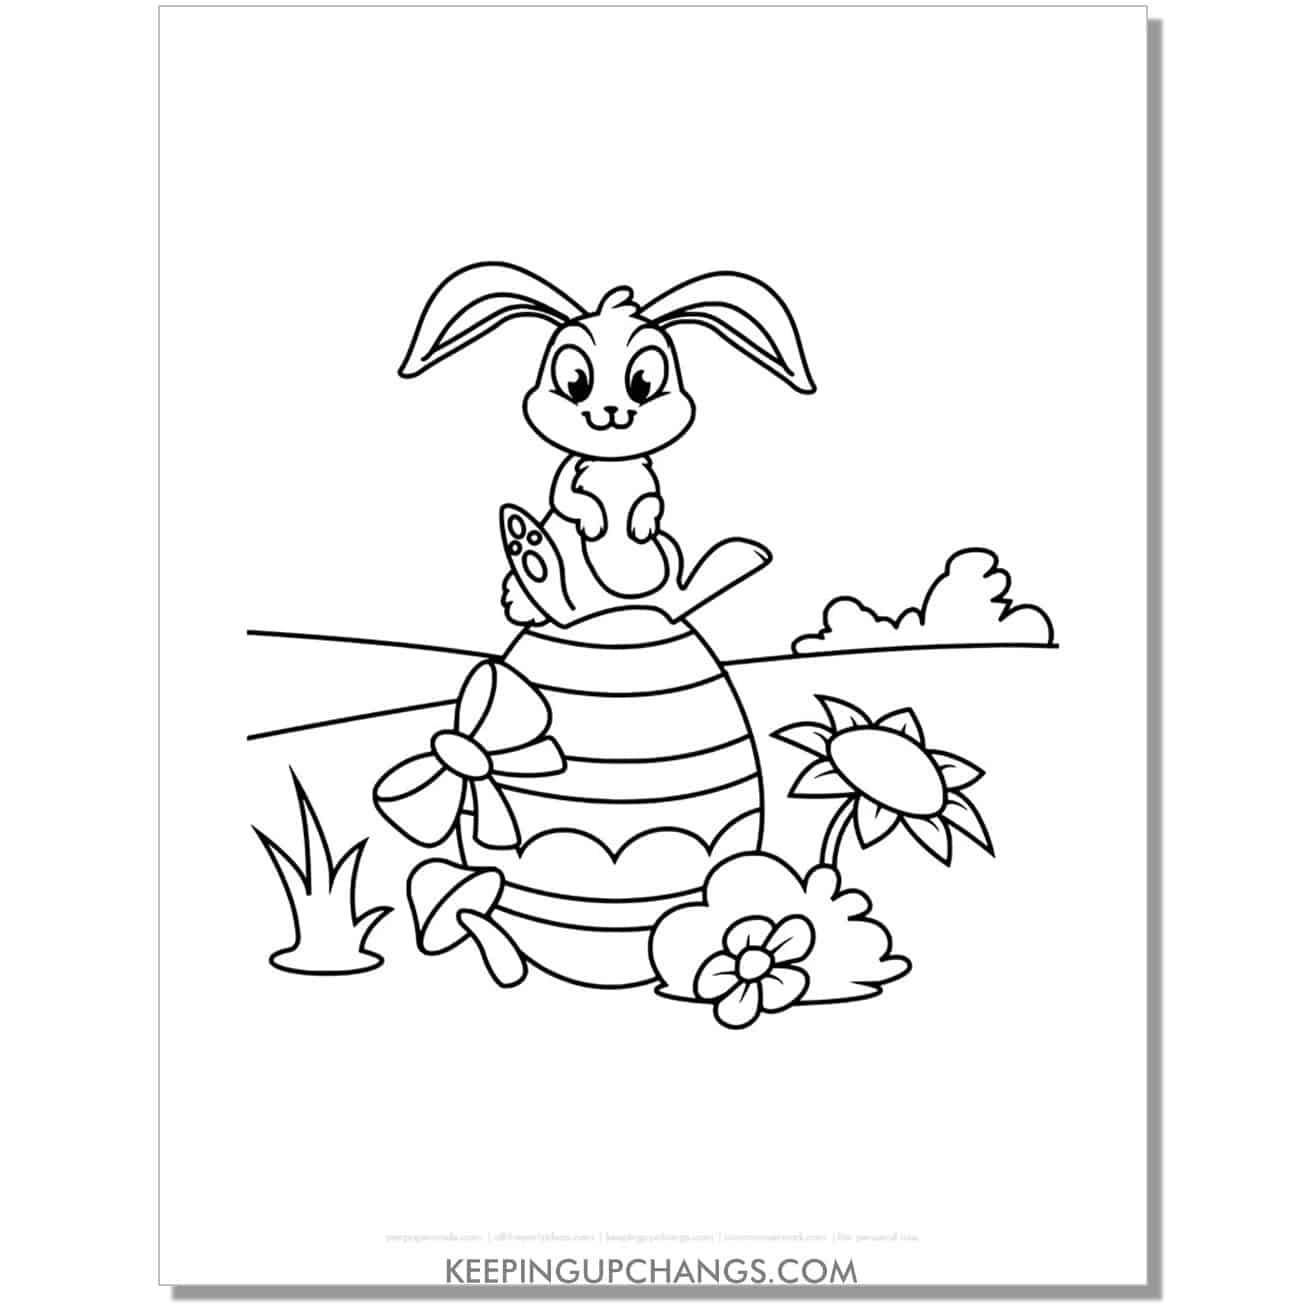 cute easter bunny sitting on egg coloring page, sheet.